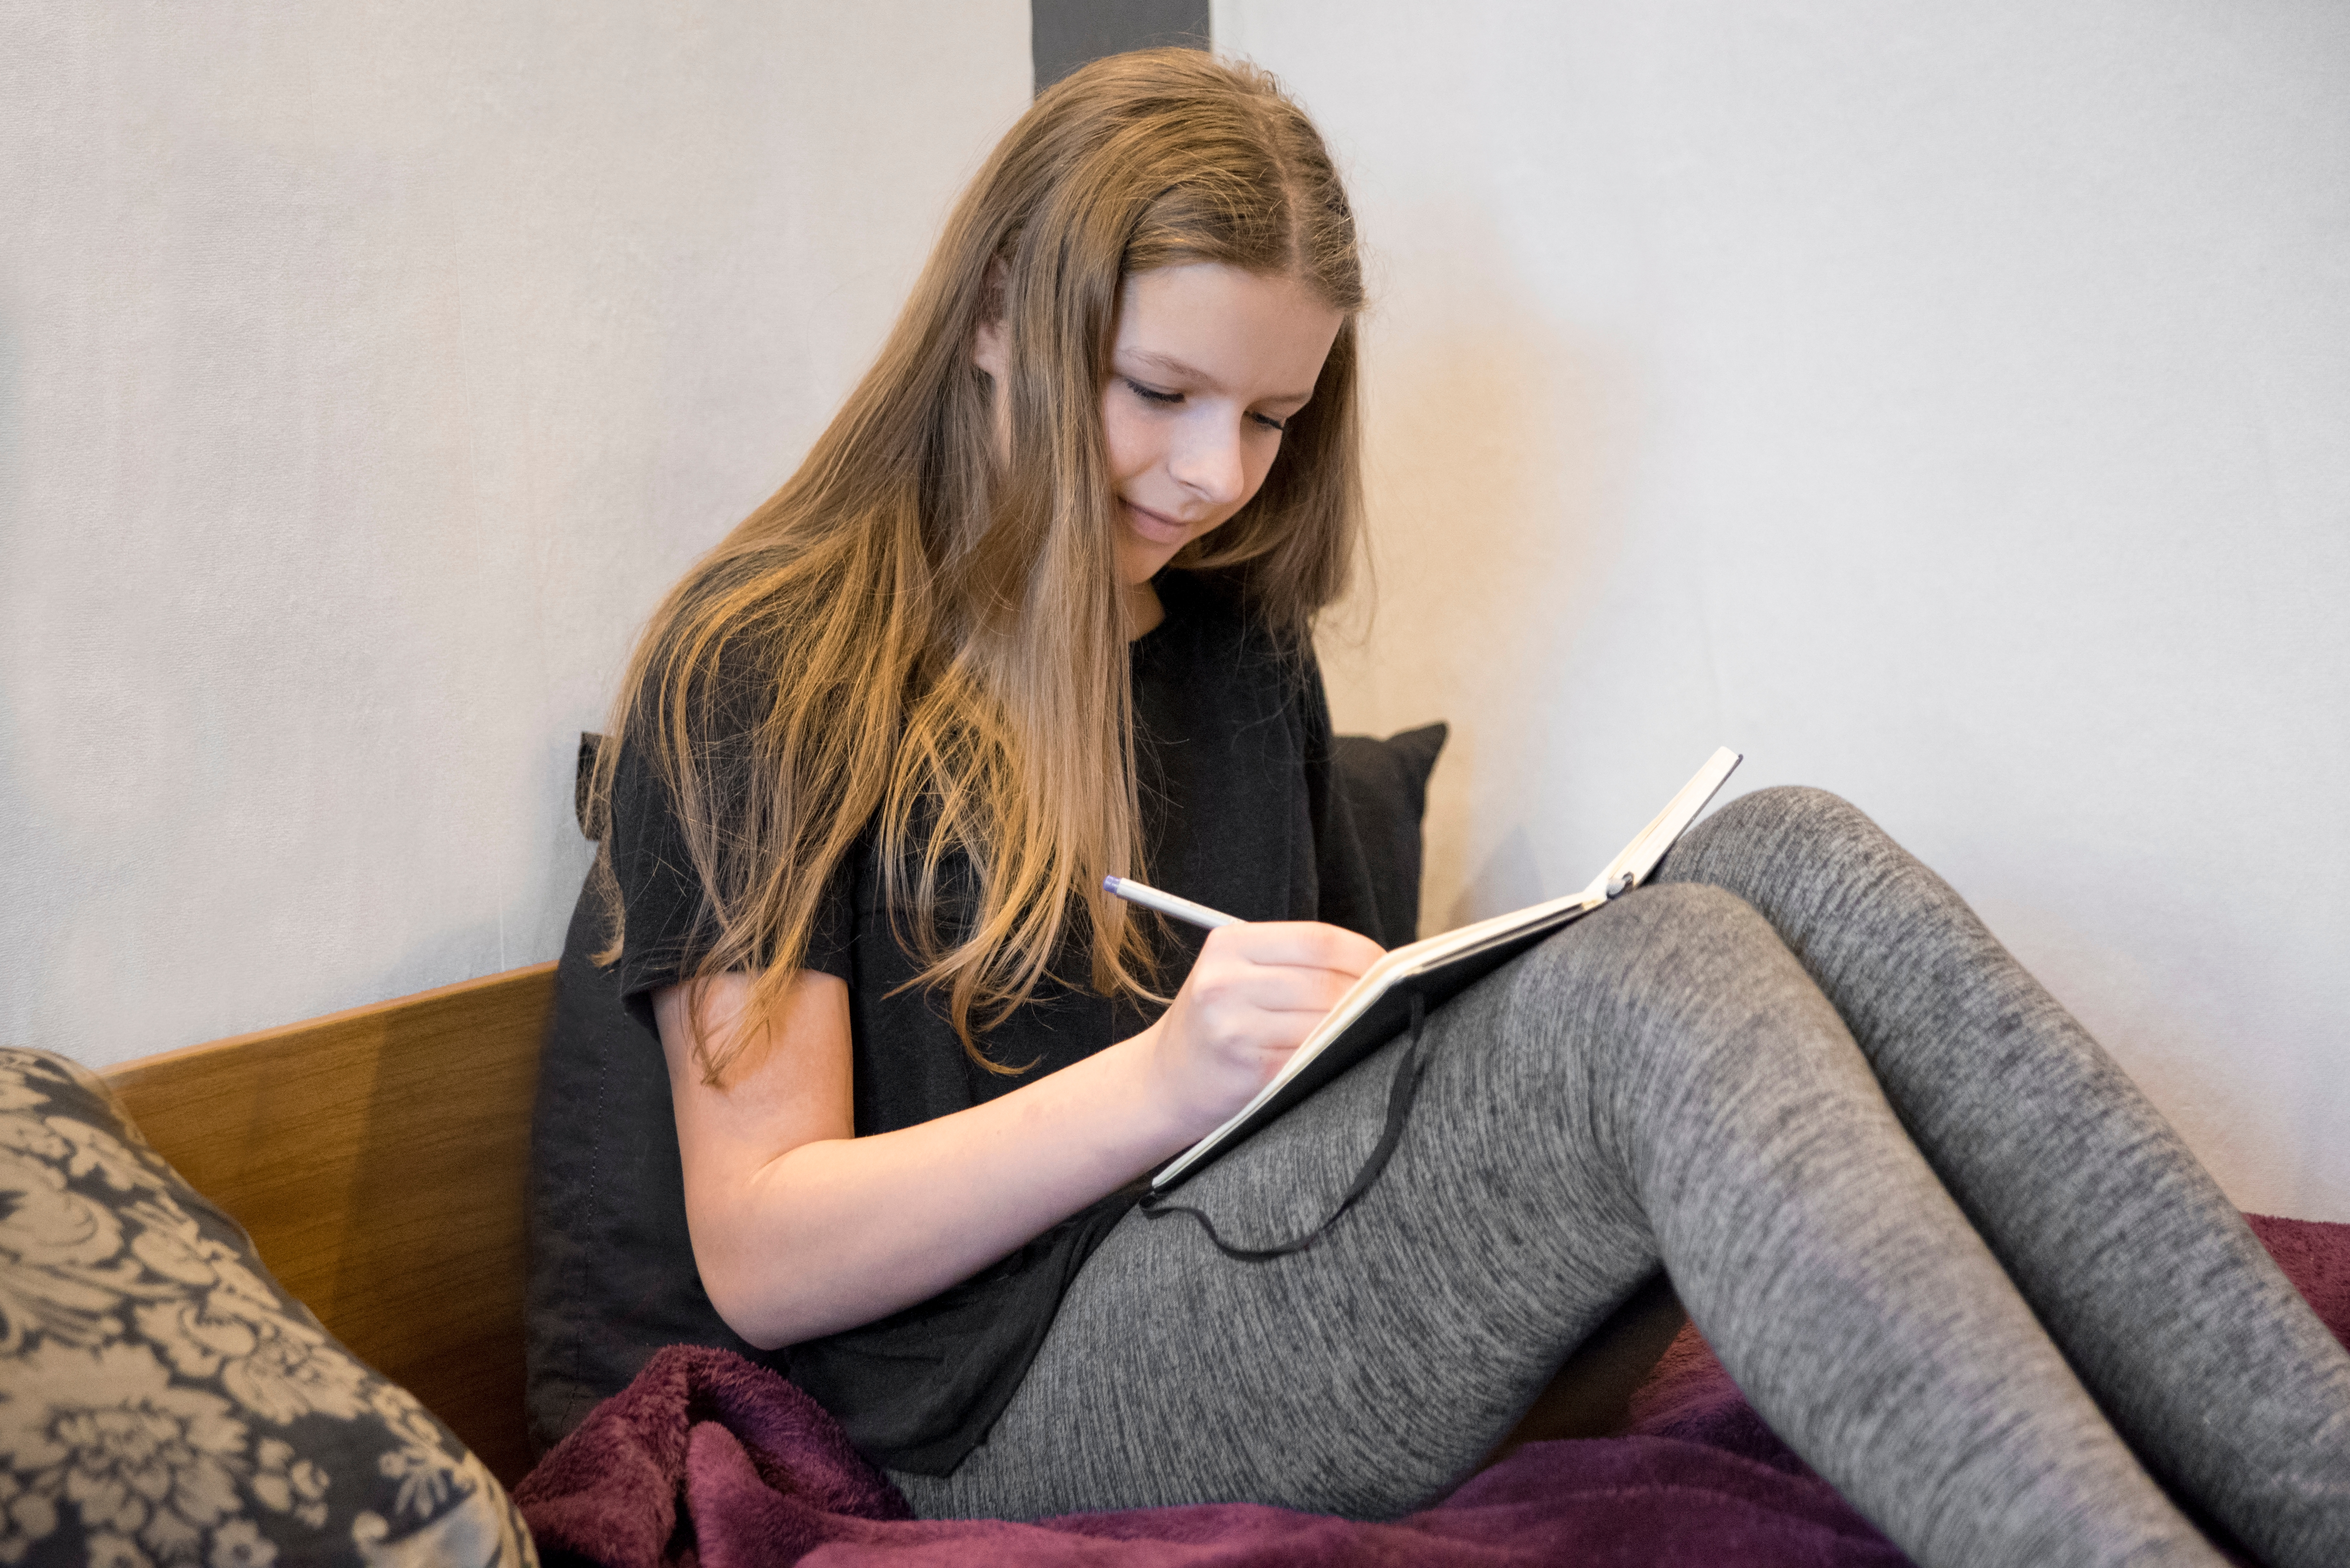 Girl sitting on a bed writing on her journal | Source: Shutterstock